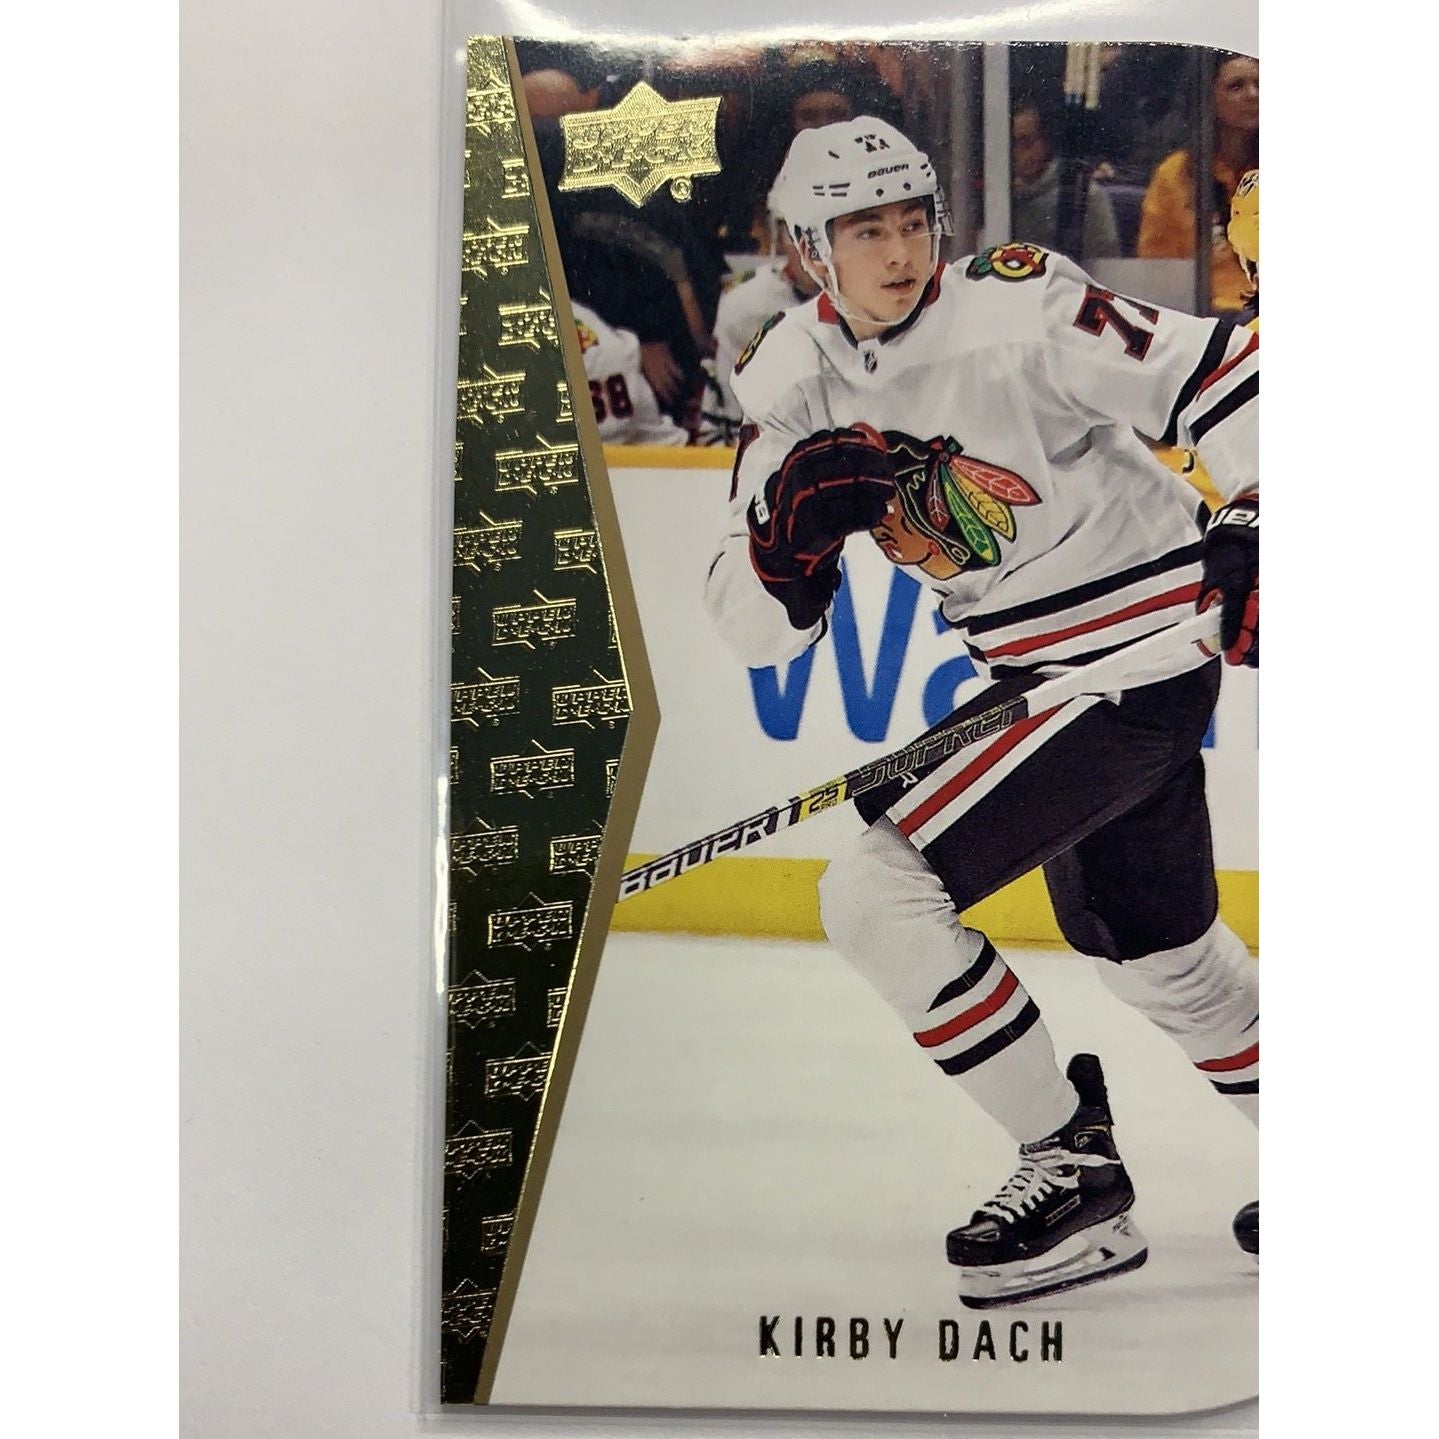  2019-20 Upper Deck Series Two Kirby Dach 95 Retro  Local Legends Cards & Collectibles